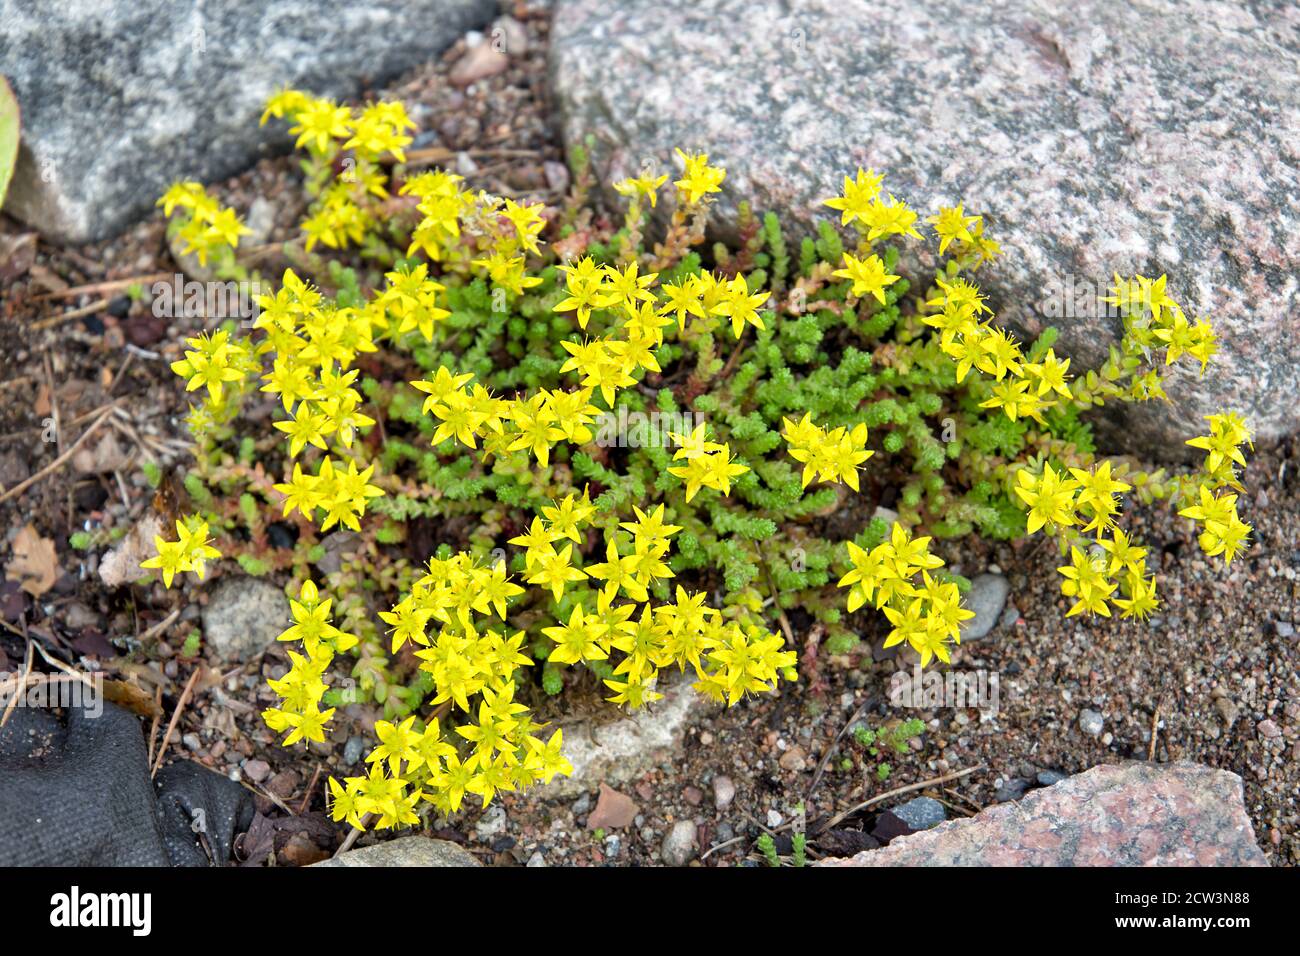 Blooming stonecrop in the garden. Growing ground cover plants Stock Photo